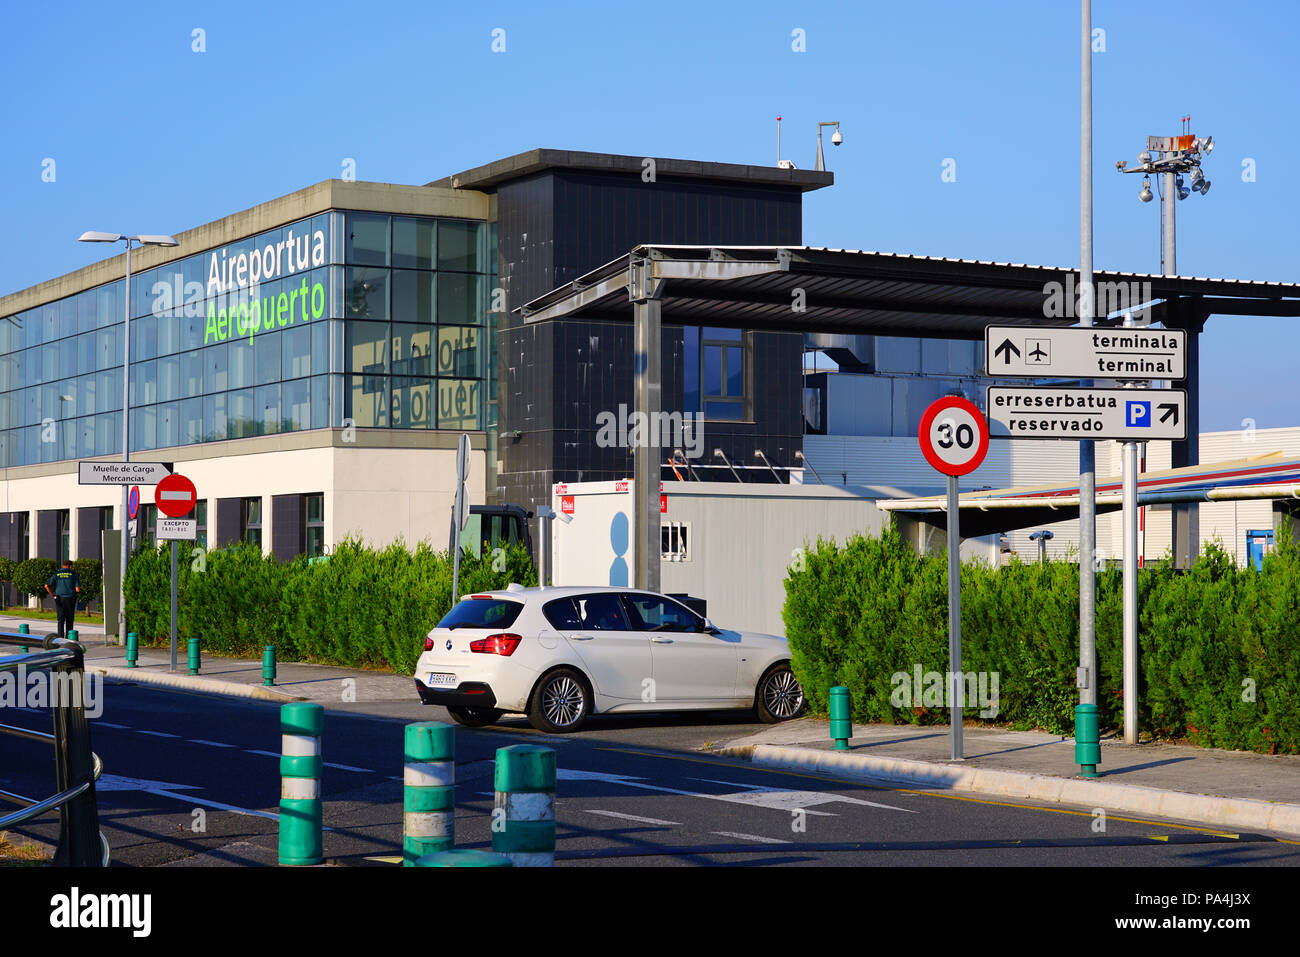 HONDARRIBIA, SPAIN -View of the San Sebastián Airport (EAS), located in Hondarribia, along the border between France and Spain in the Basque country. Stock Photo